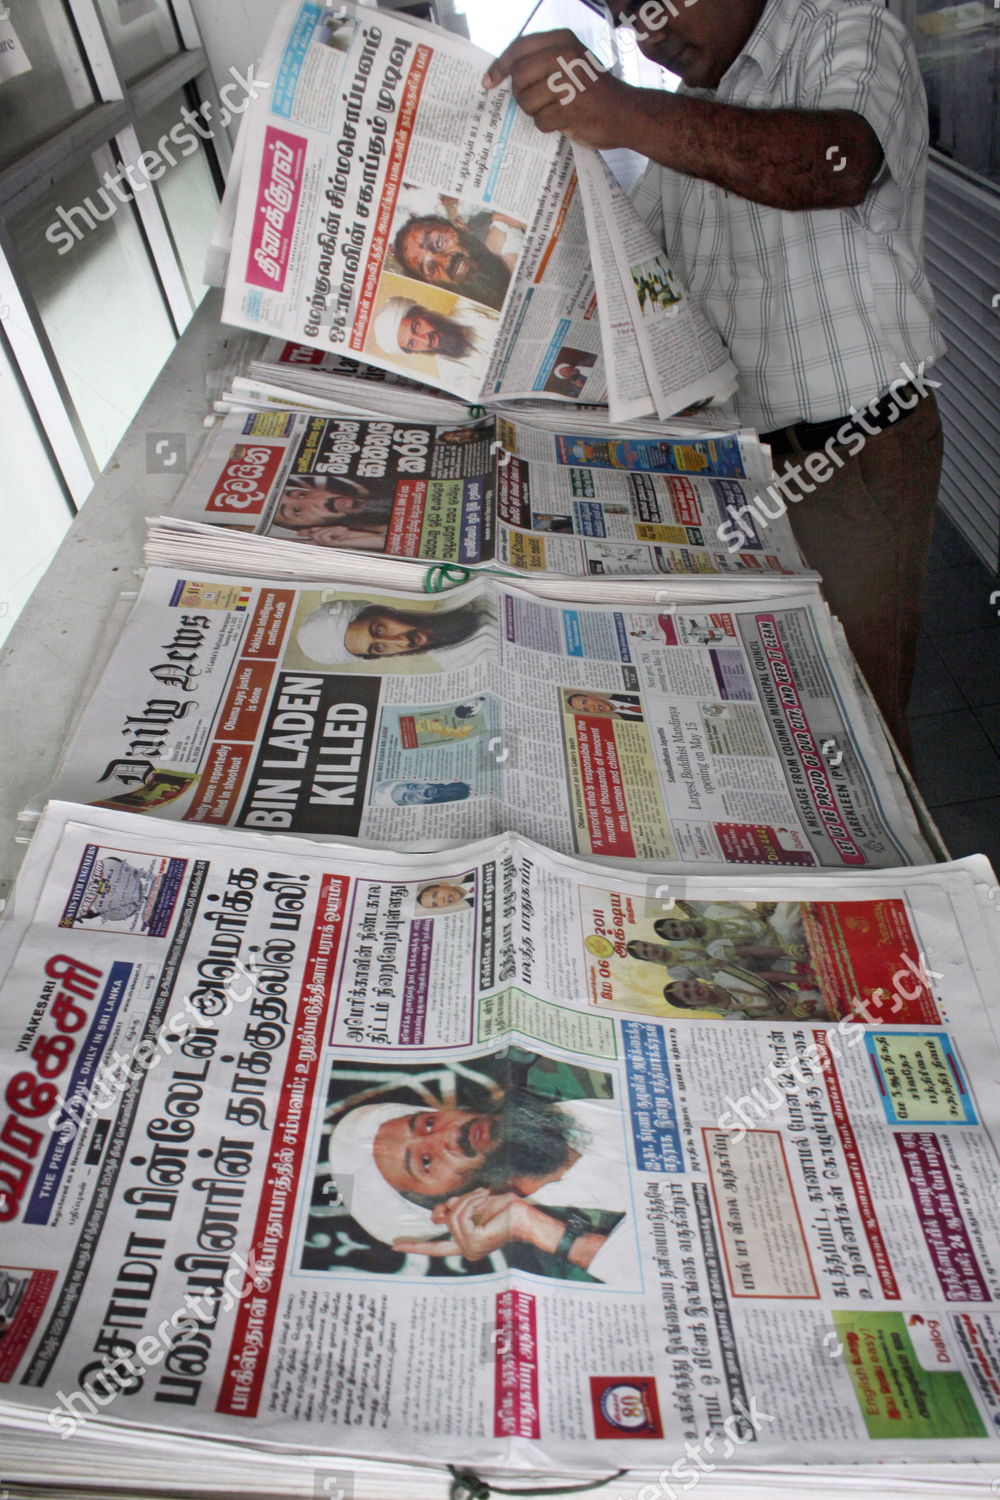 Sri Lankan Reads Tamil News Paper Frontpage Editorial Stock Photo Stock Image Shutterstock